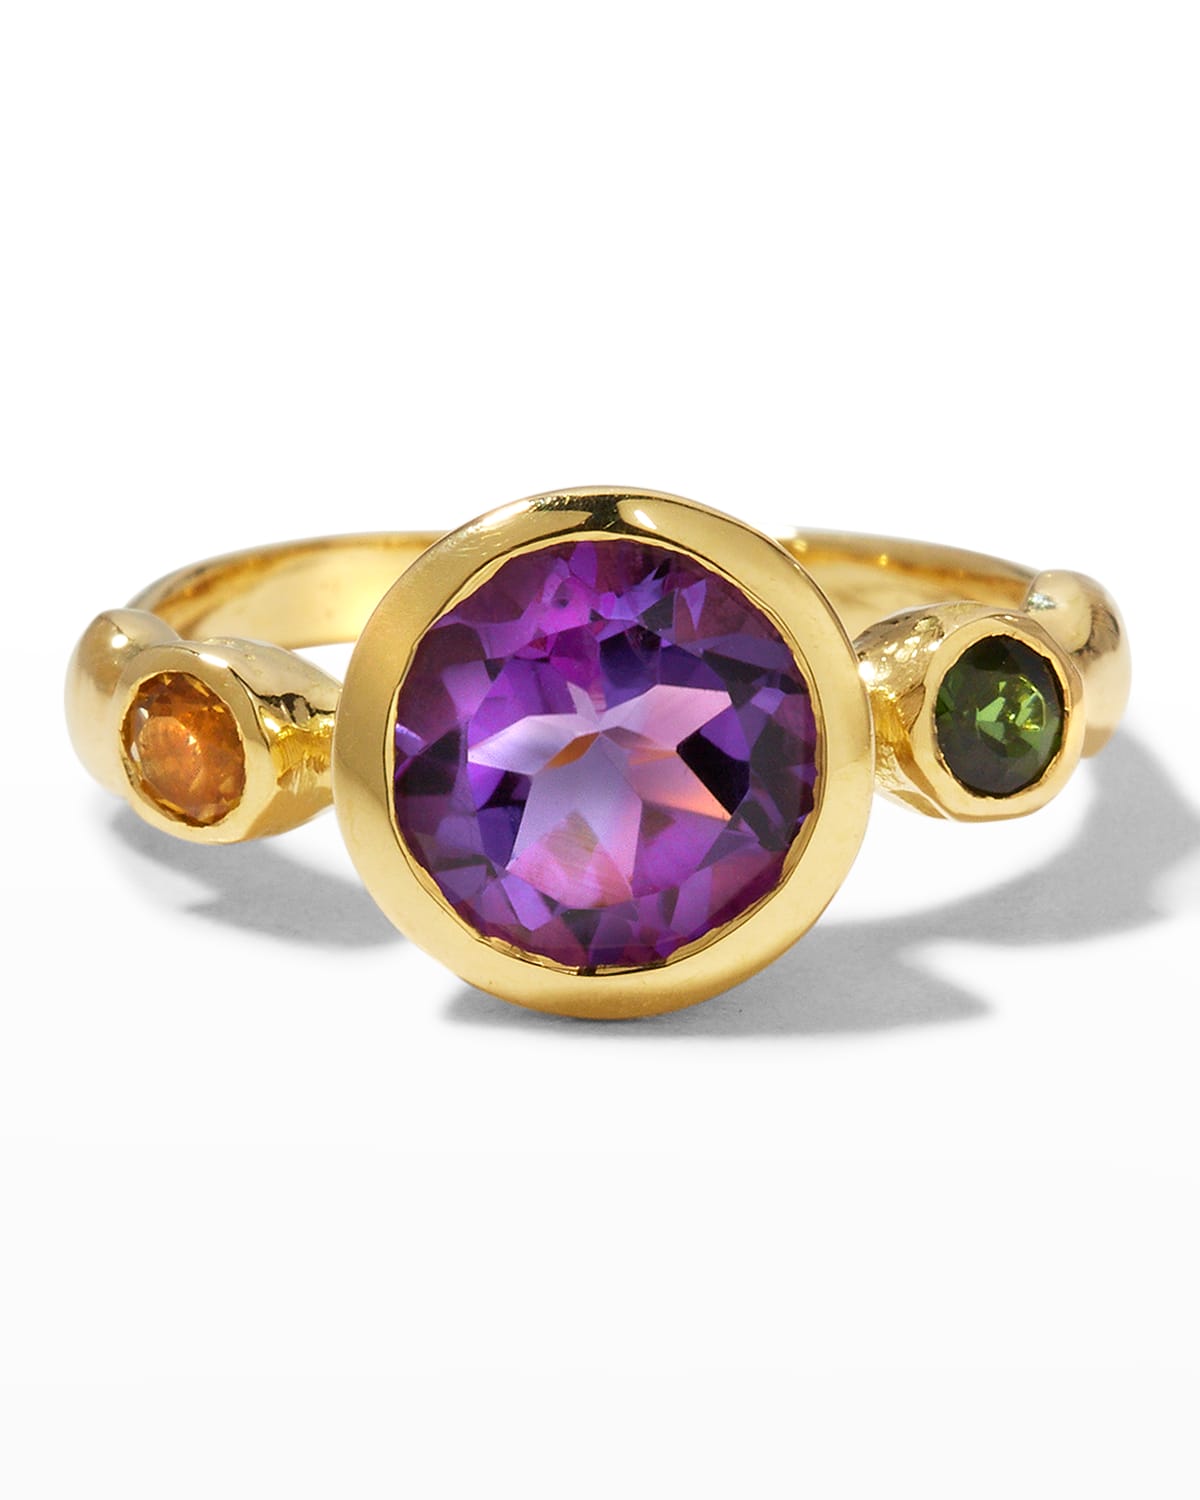 Lee Brevard Sybil Ring with Amethyst, Tourmaline and Citrine